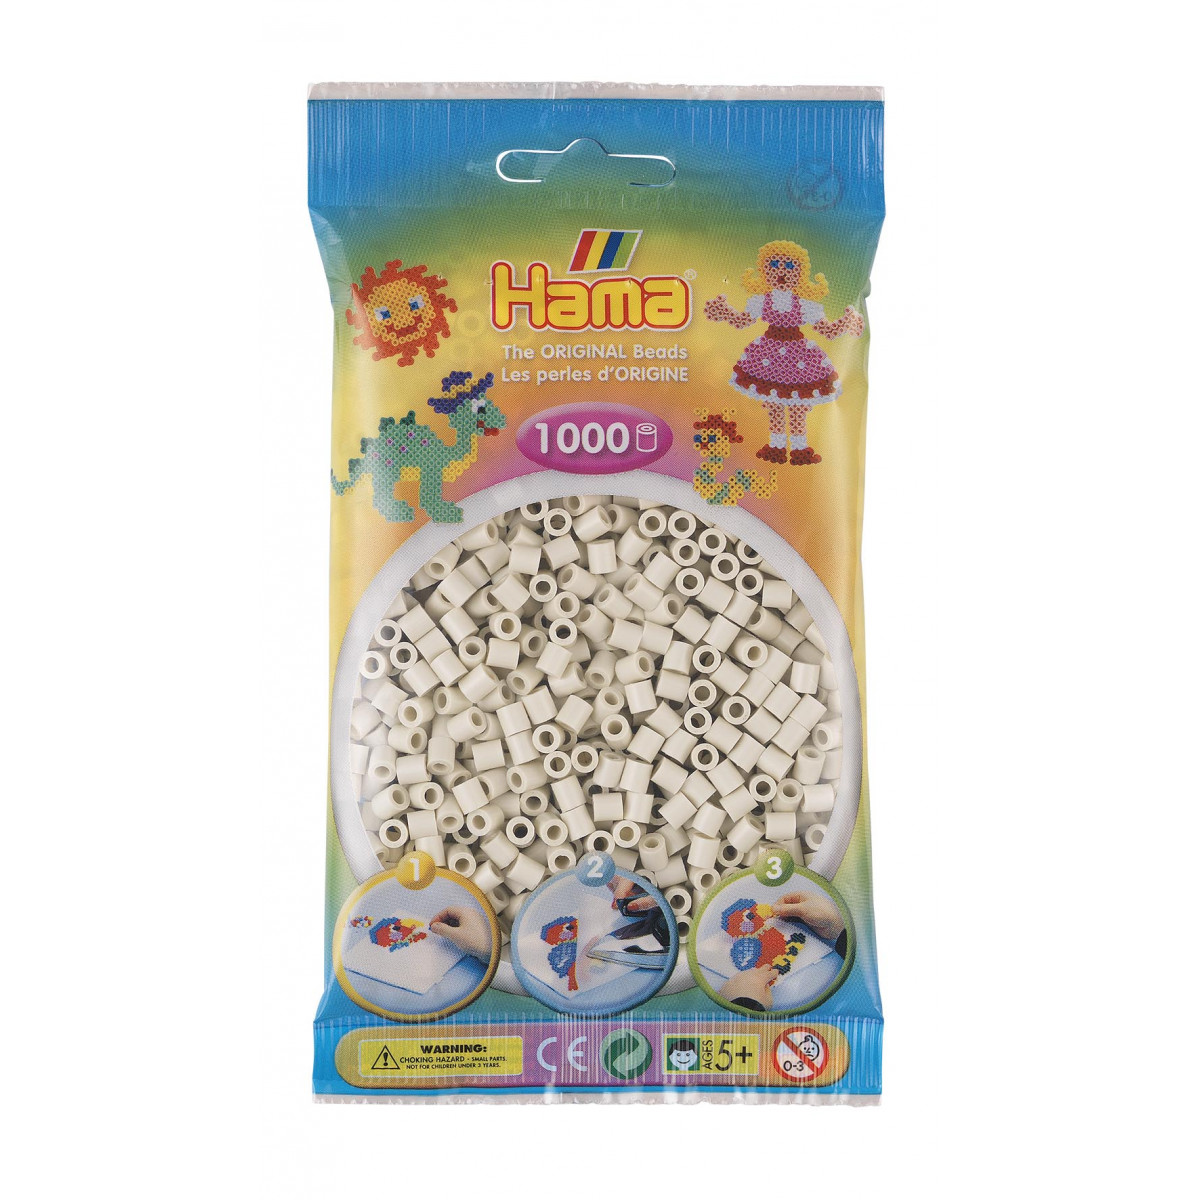 Hama 207-57 1000 Glow in The Dark Blue Beads for sale online